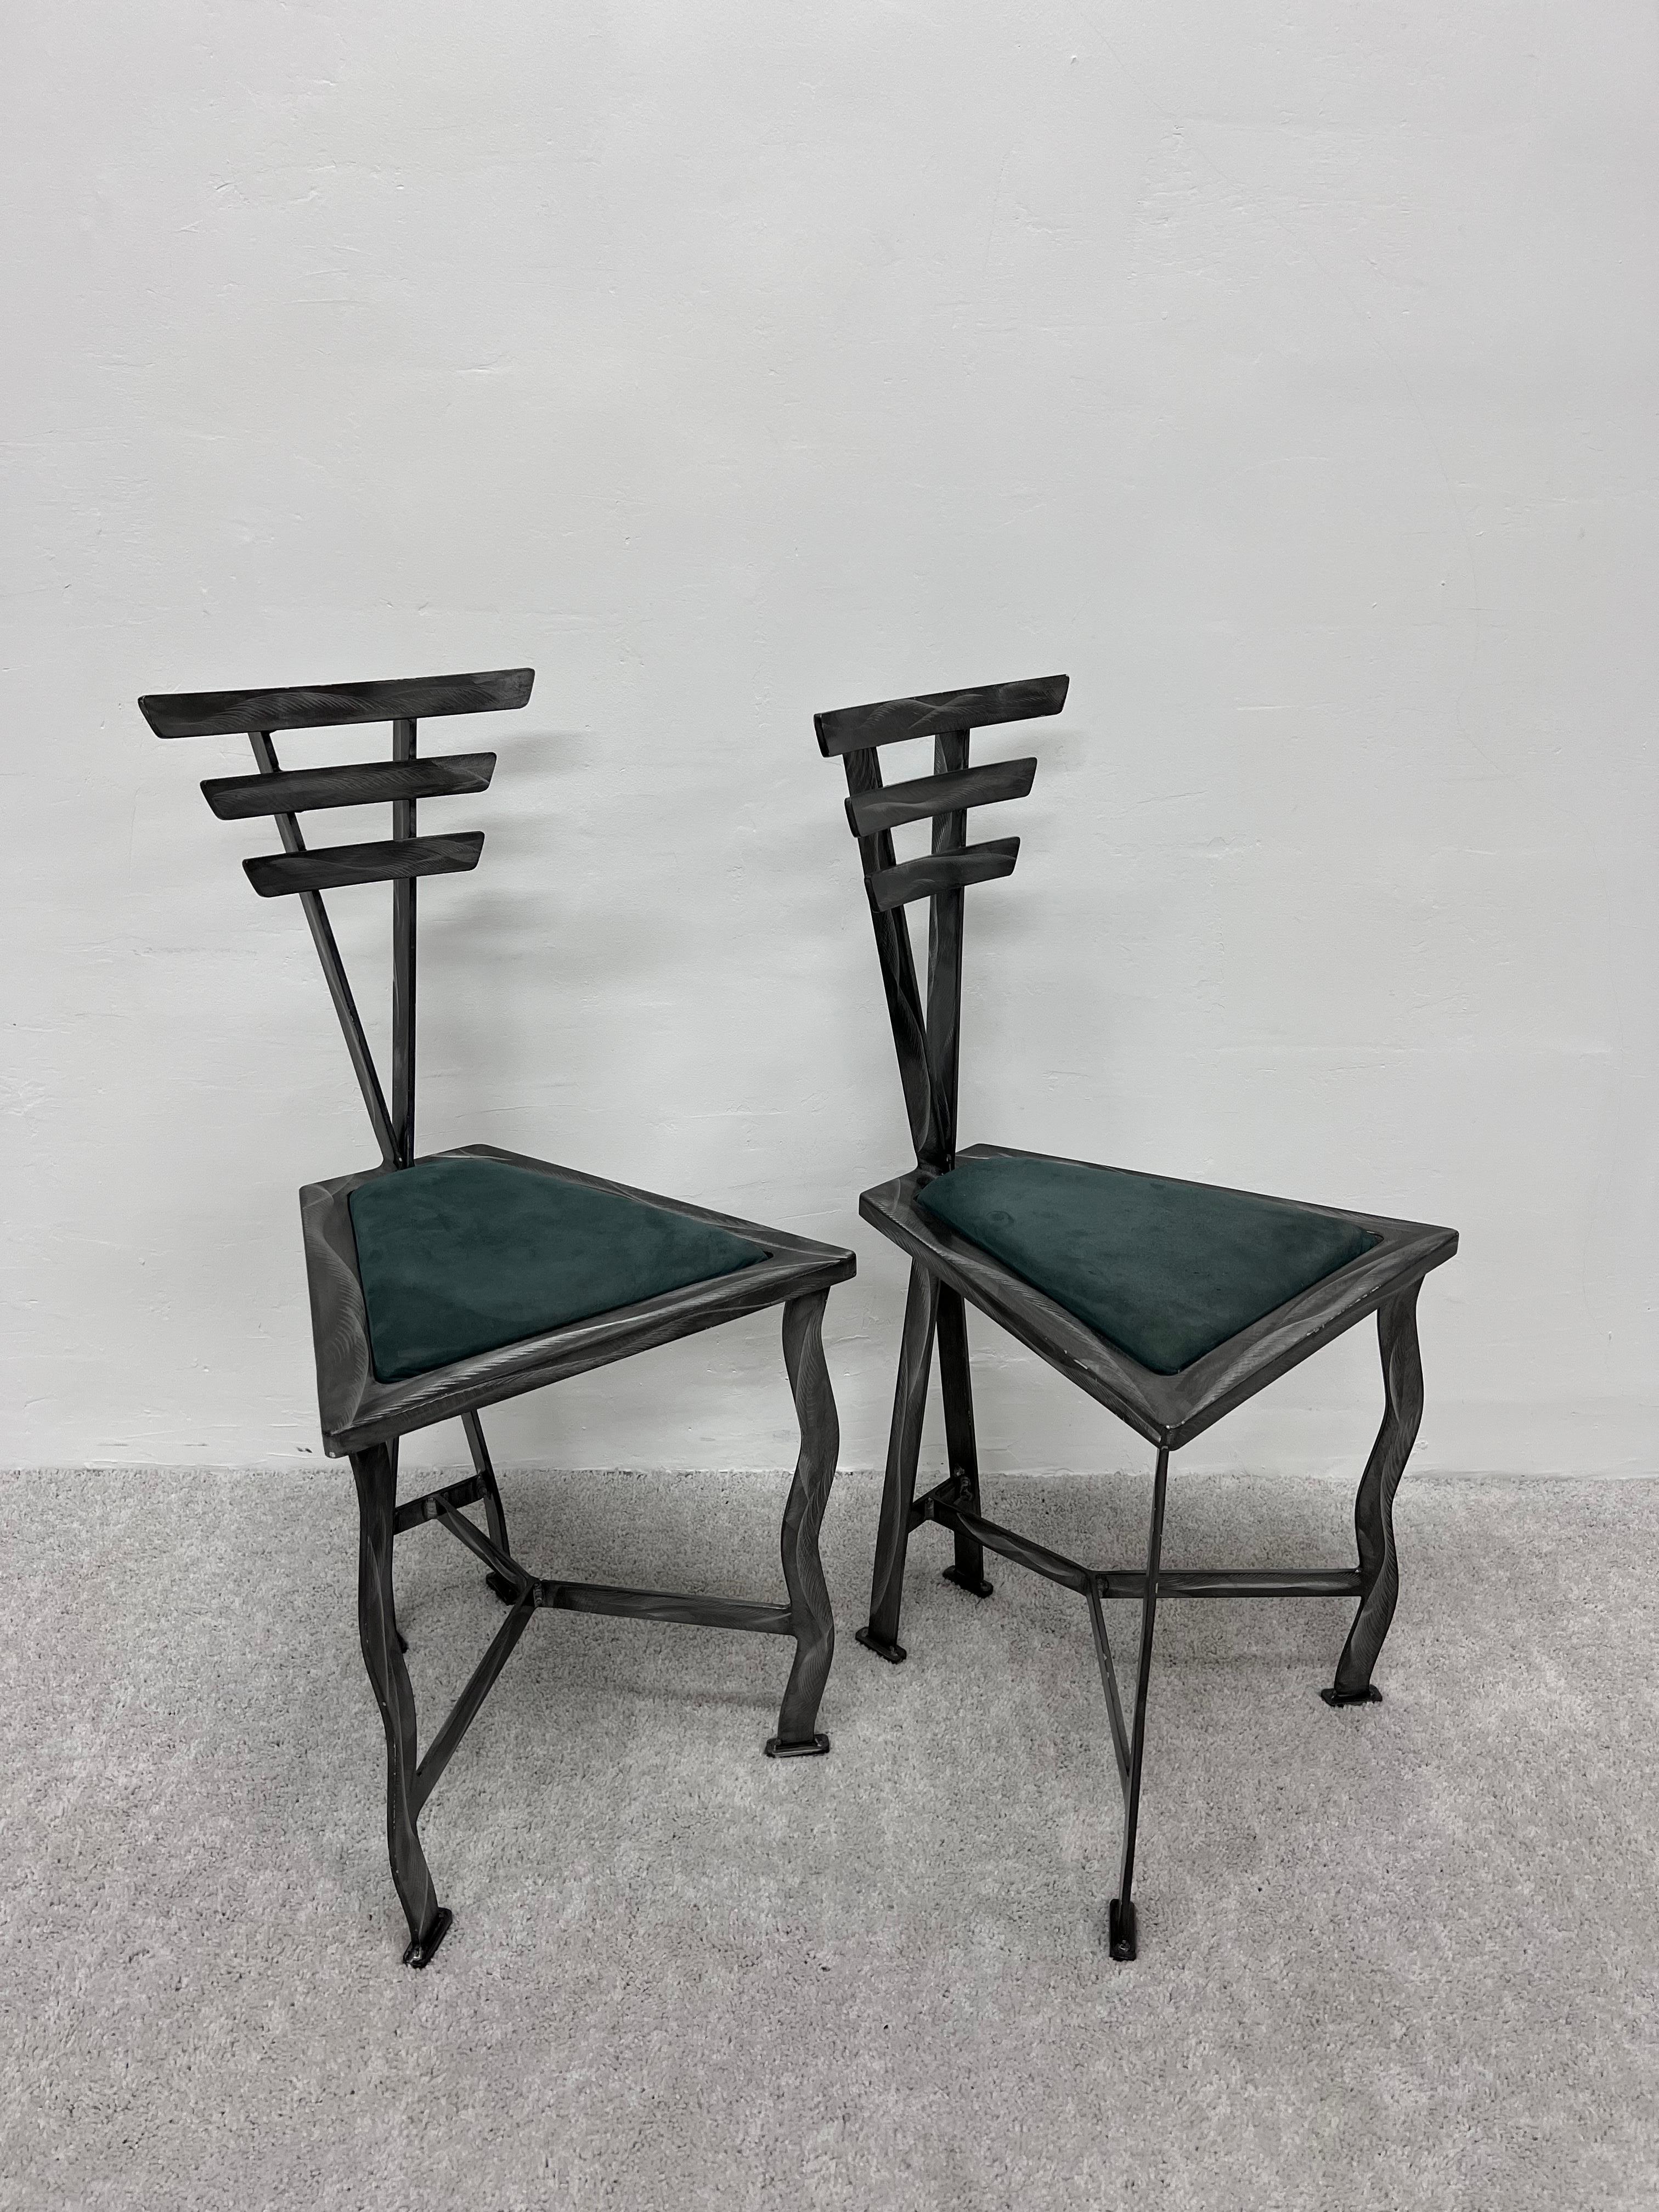 Modern 90s Postmodern Contemporary Welded Steel Studio Side Chairs, a Pair For Sale